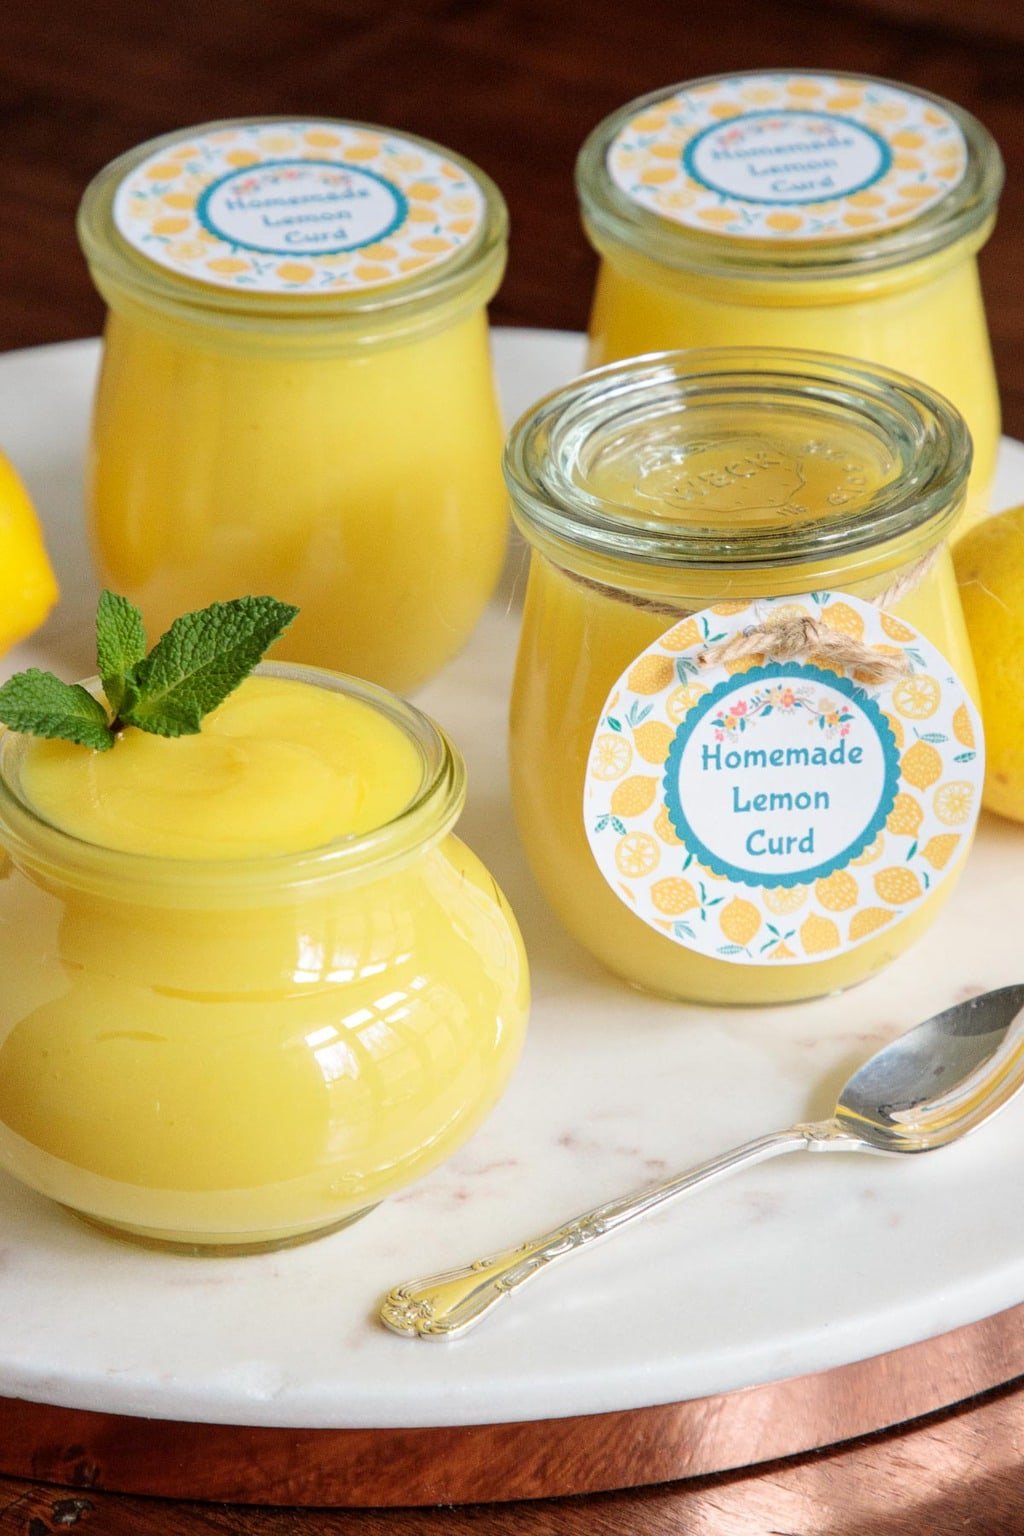 Vertical closeup photo of Weck glass jars filled with Ridiculously Easy Microwave Lemon Curd with custom gift labels.